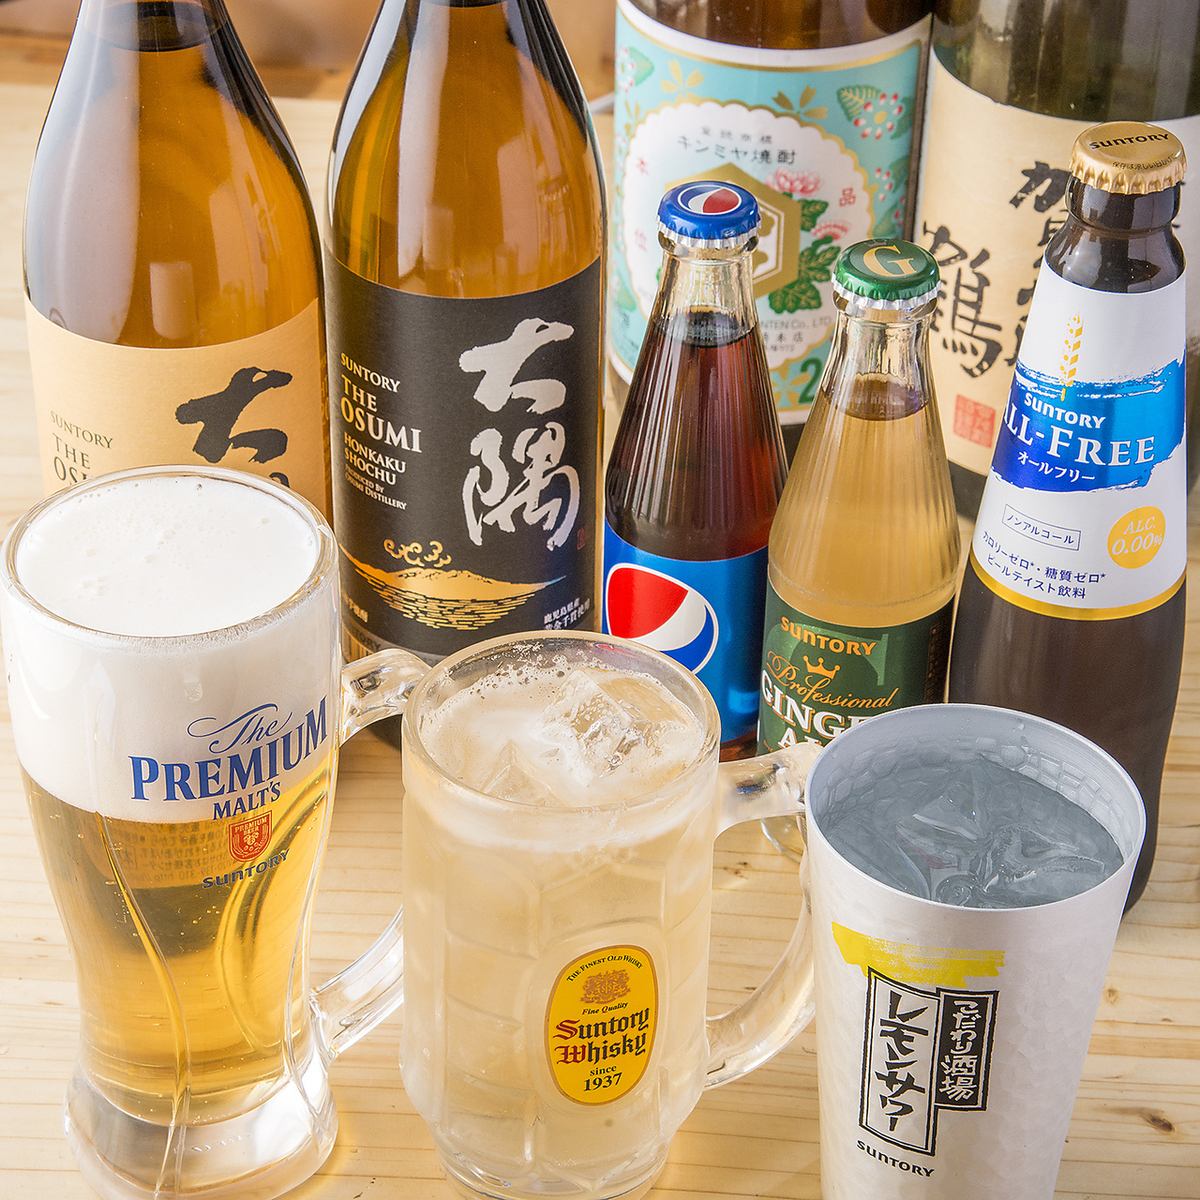 We offer a great deal on all-you-can-drink ♪